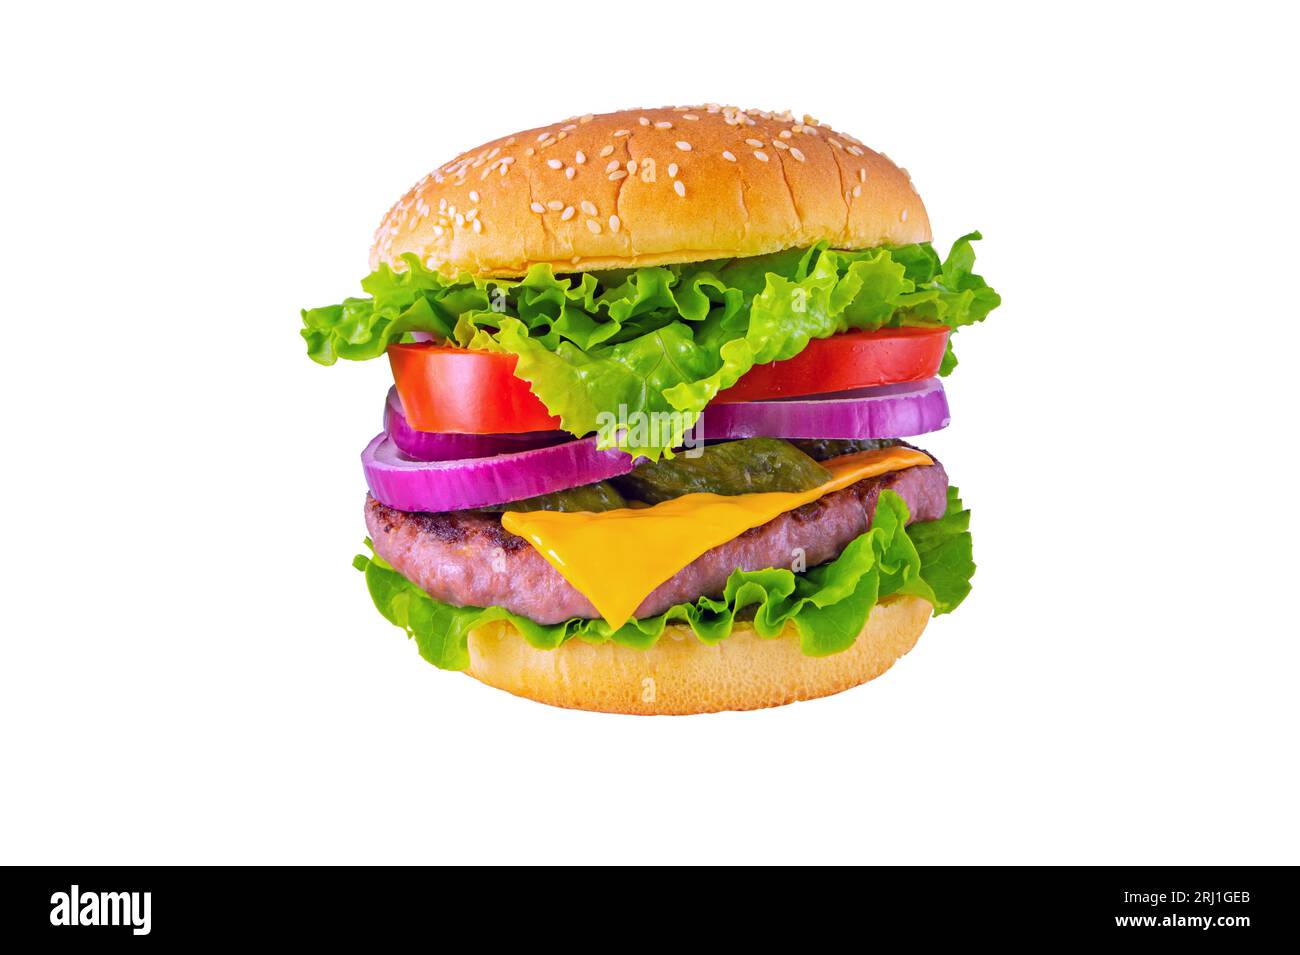 Hamburger or burger with patty of ground beef meat, cheese, lettuce, tomato, onion,  pickles and bun with sesame seeds. Tasty colorful sandwich isolat Stock Photo